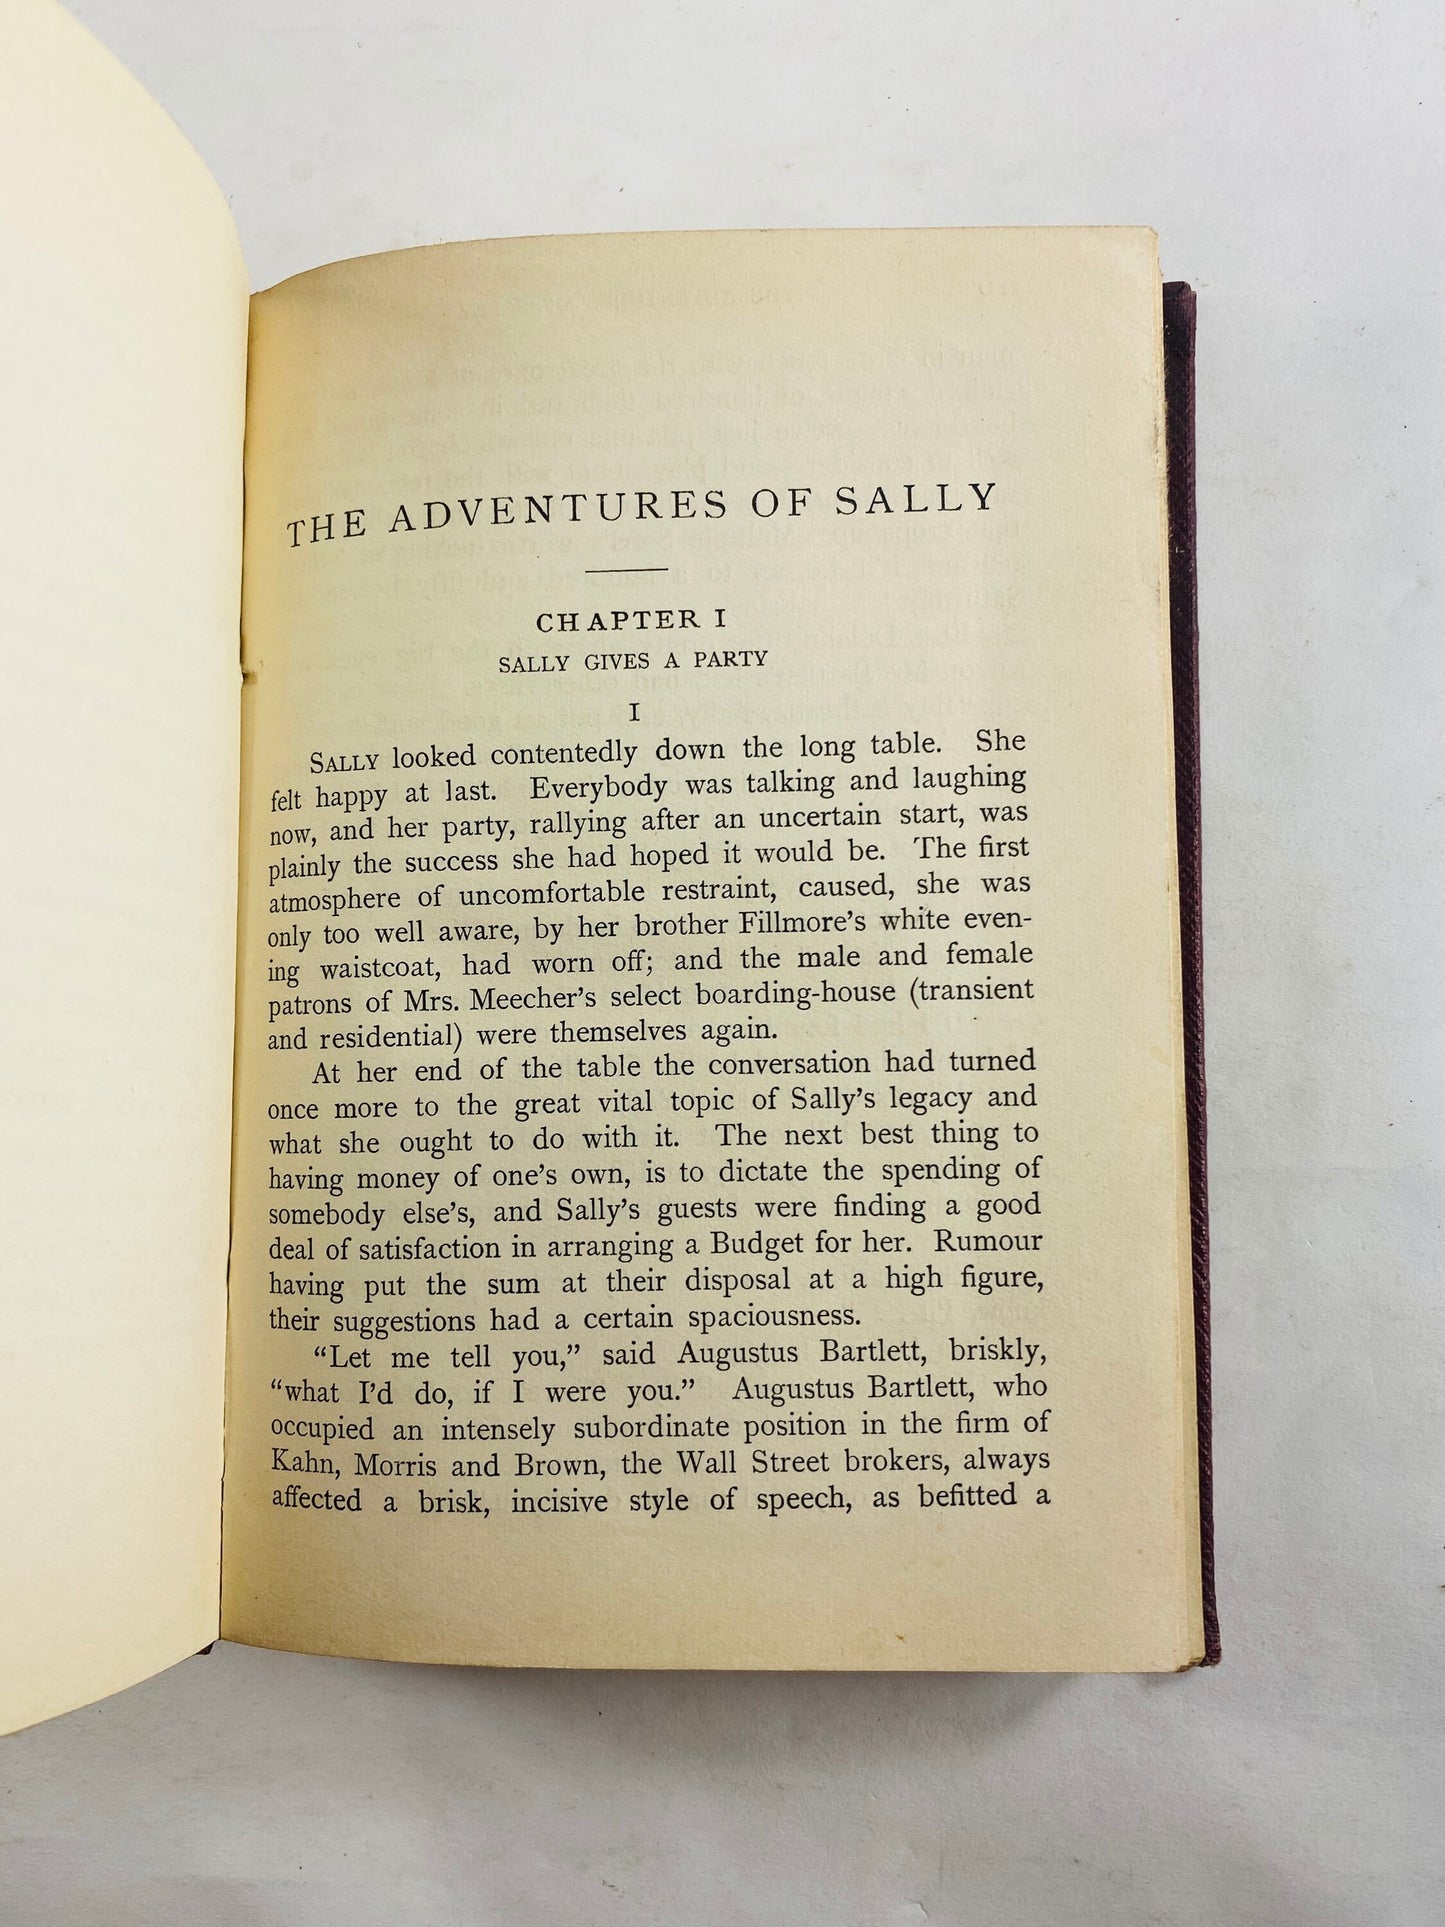 1926 Adventures of Sally by PG Wodehouse vintage book about a taxi dancer who inherits a considerable fortune Small red Tauchnitz antique